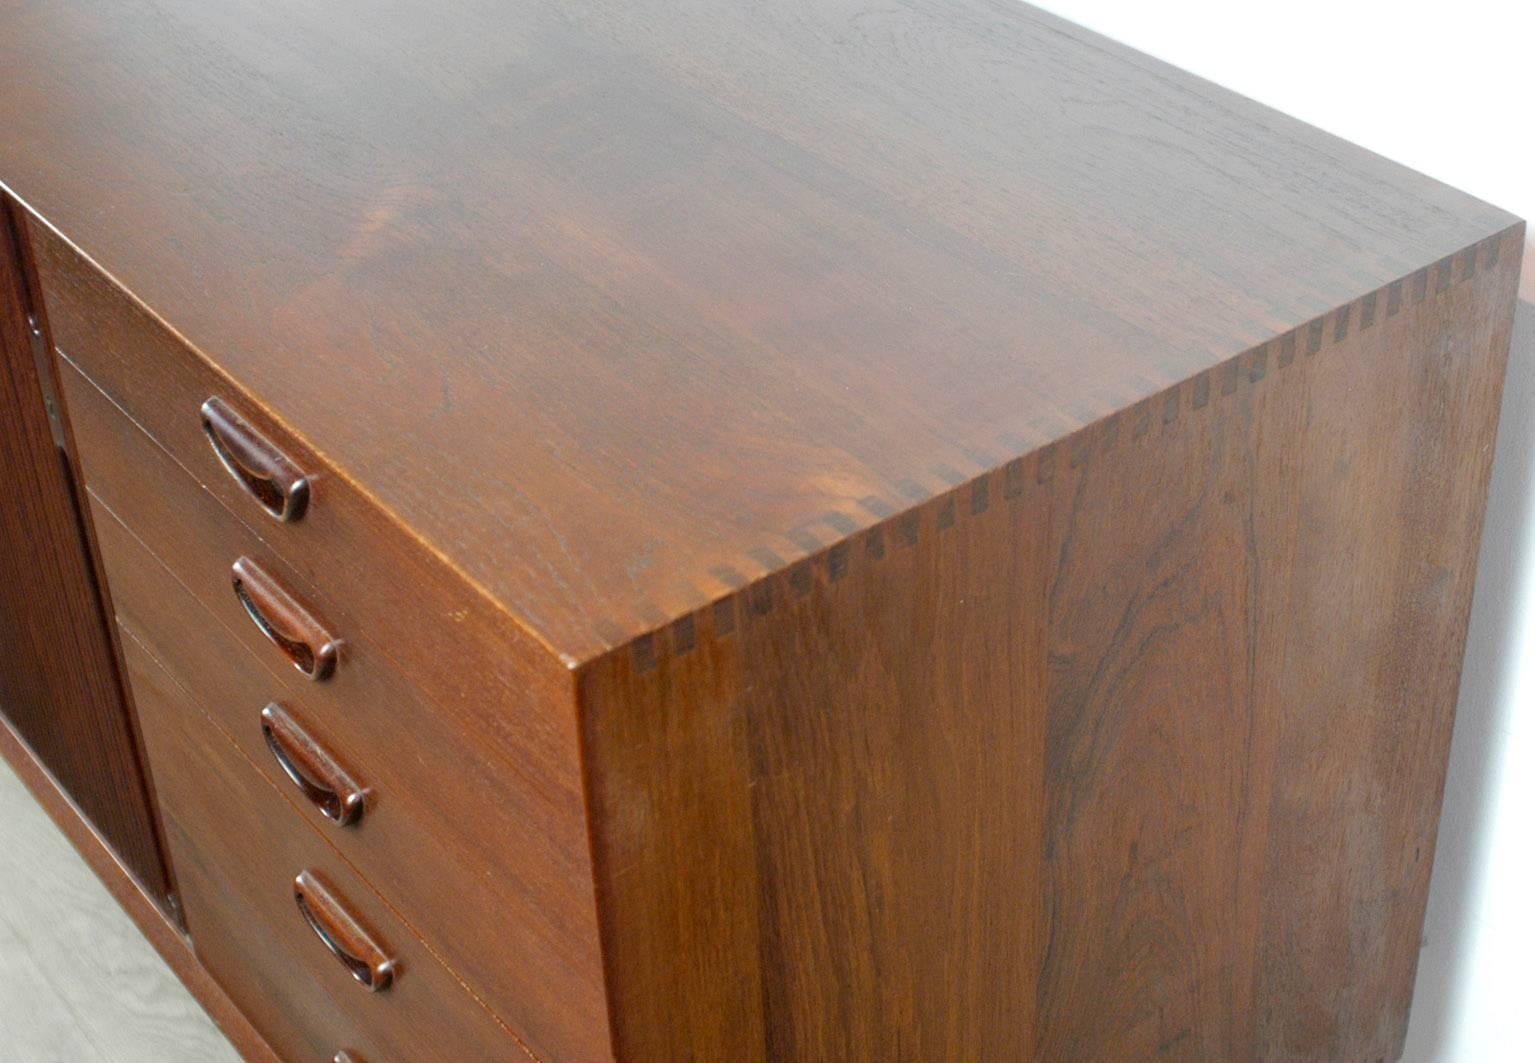 Scandinavian Teak Credenza with Tambour sliding door and five drawers- a timeless beauty!